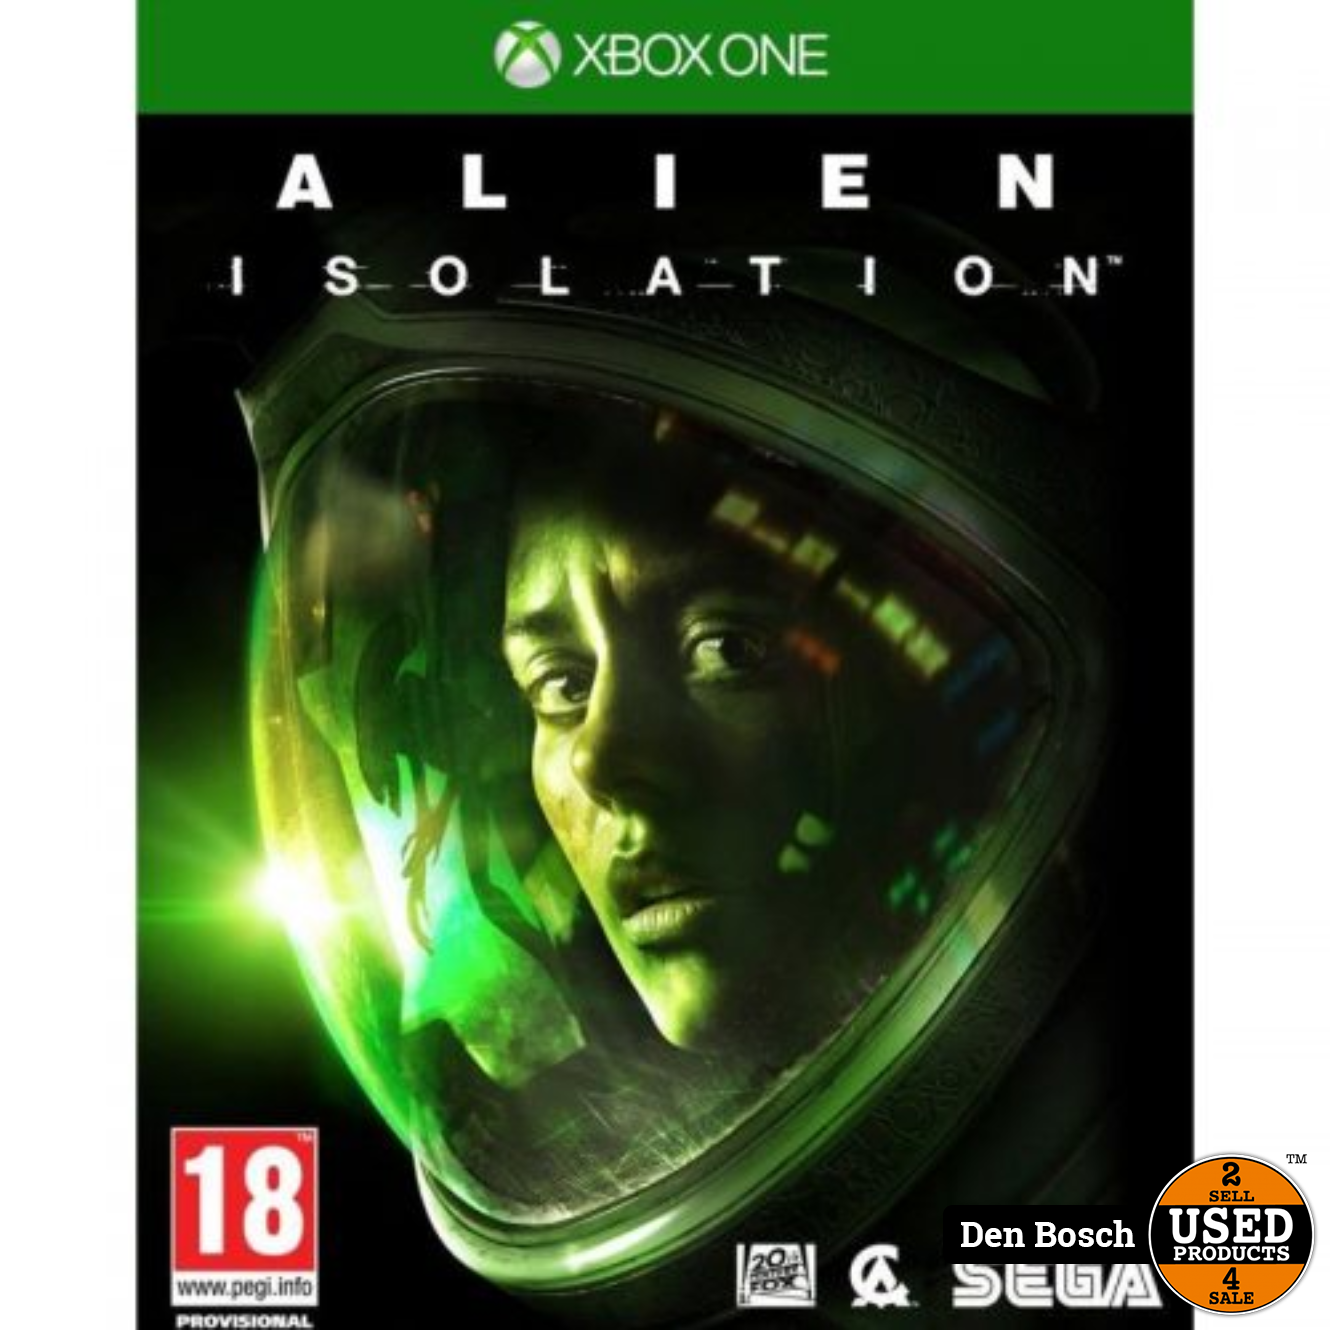 helling verdieping attribuut Alien Isolation - Xbox One Game - Used Products Den Bosch